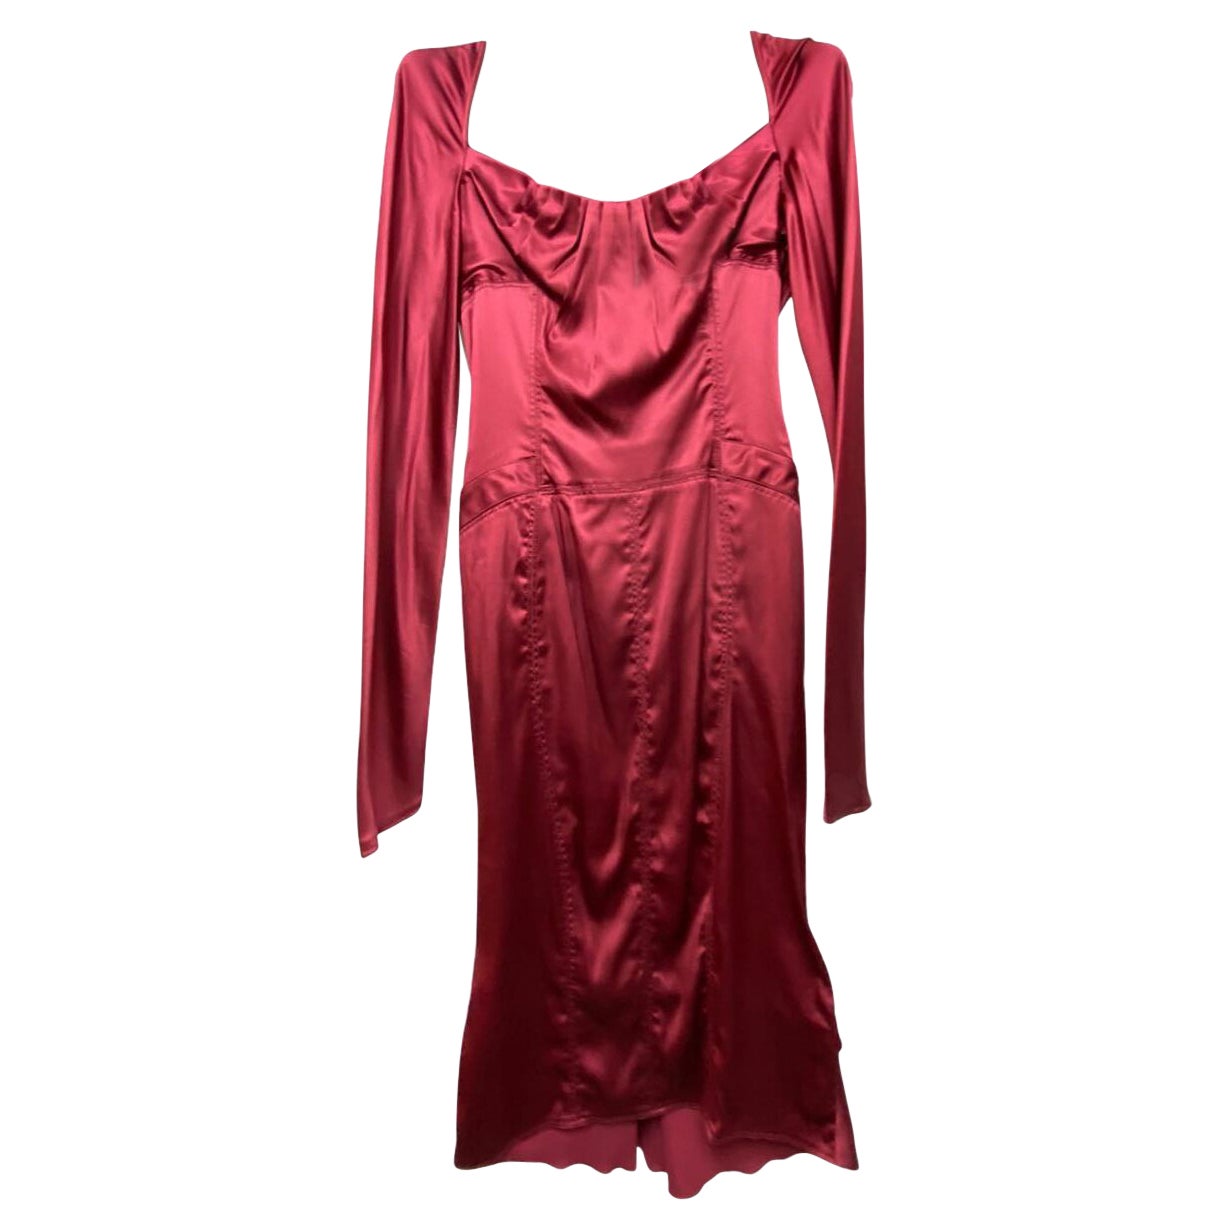 F/W 2003 Vintage Tom Ford for Gucci Red Silk Dress